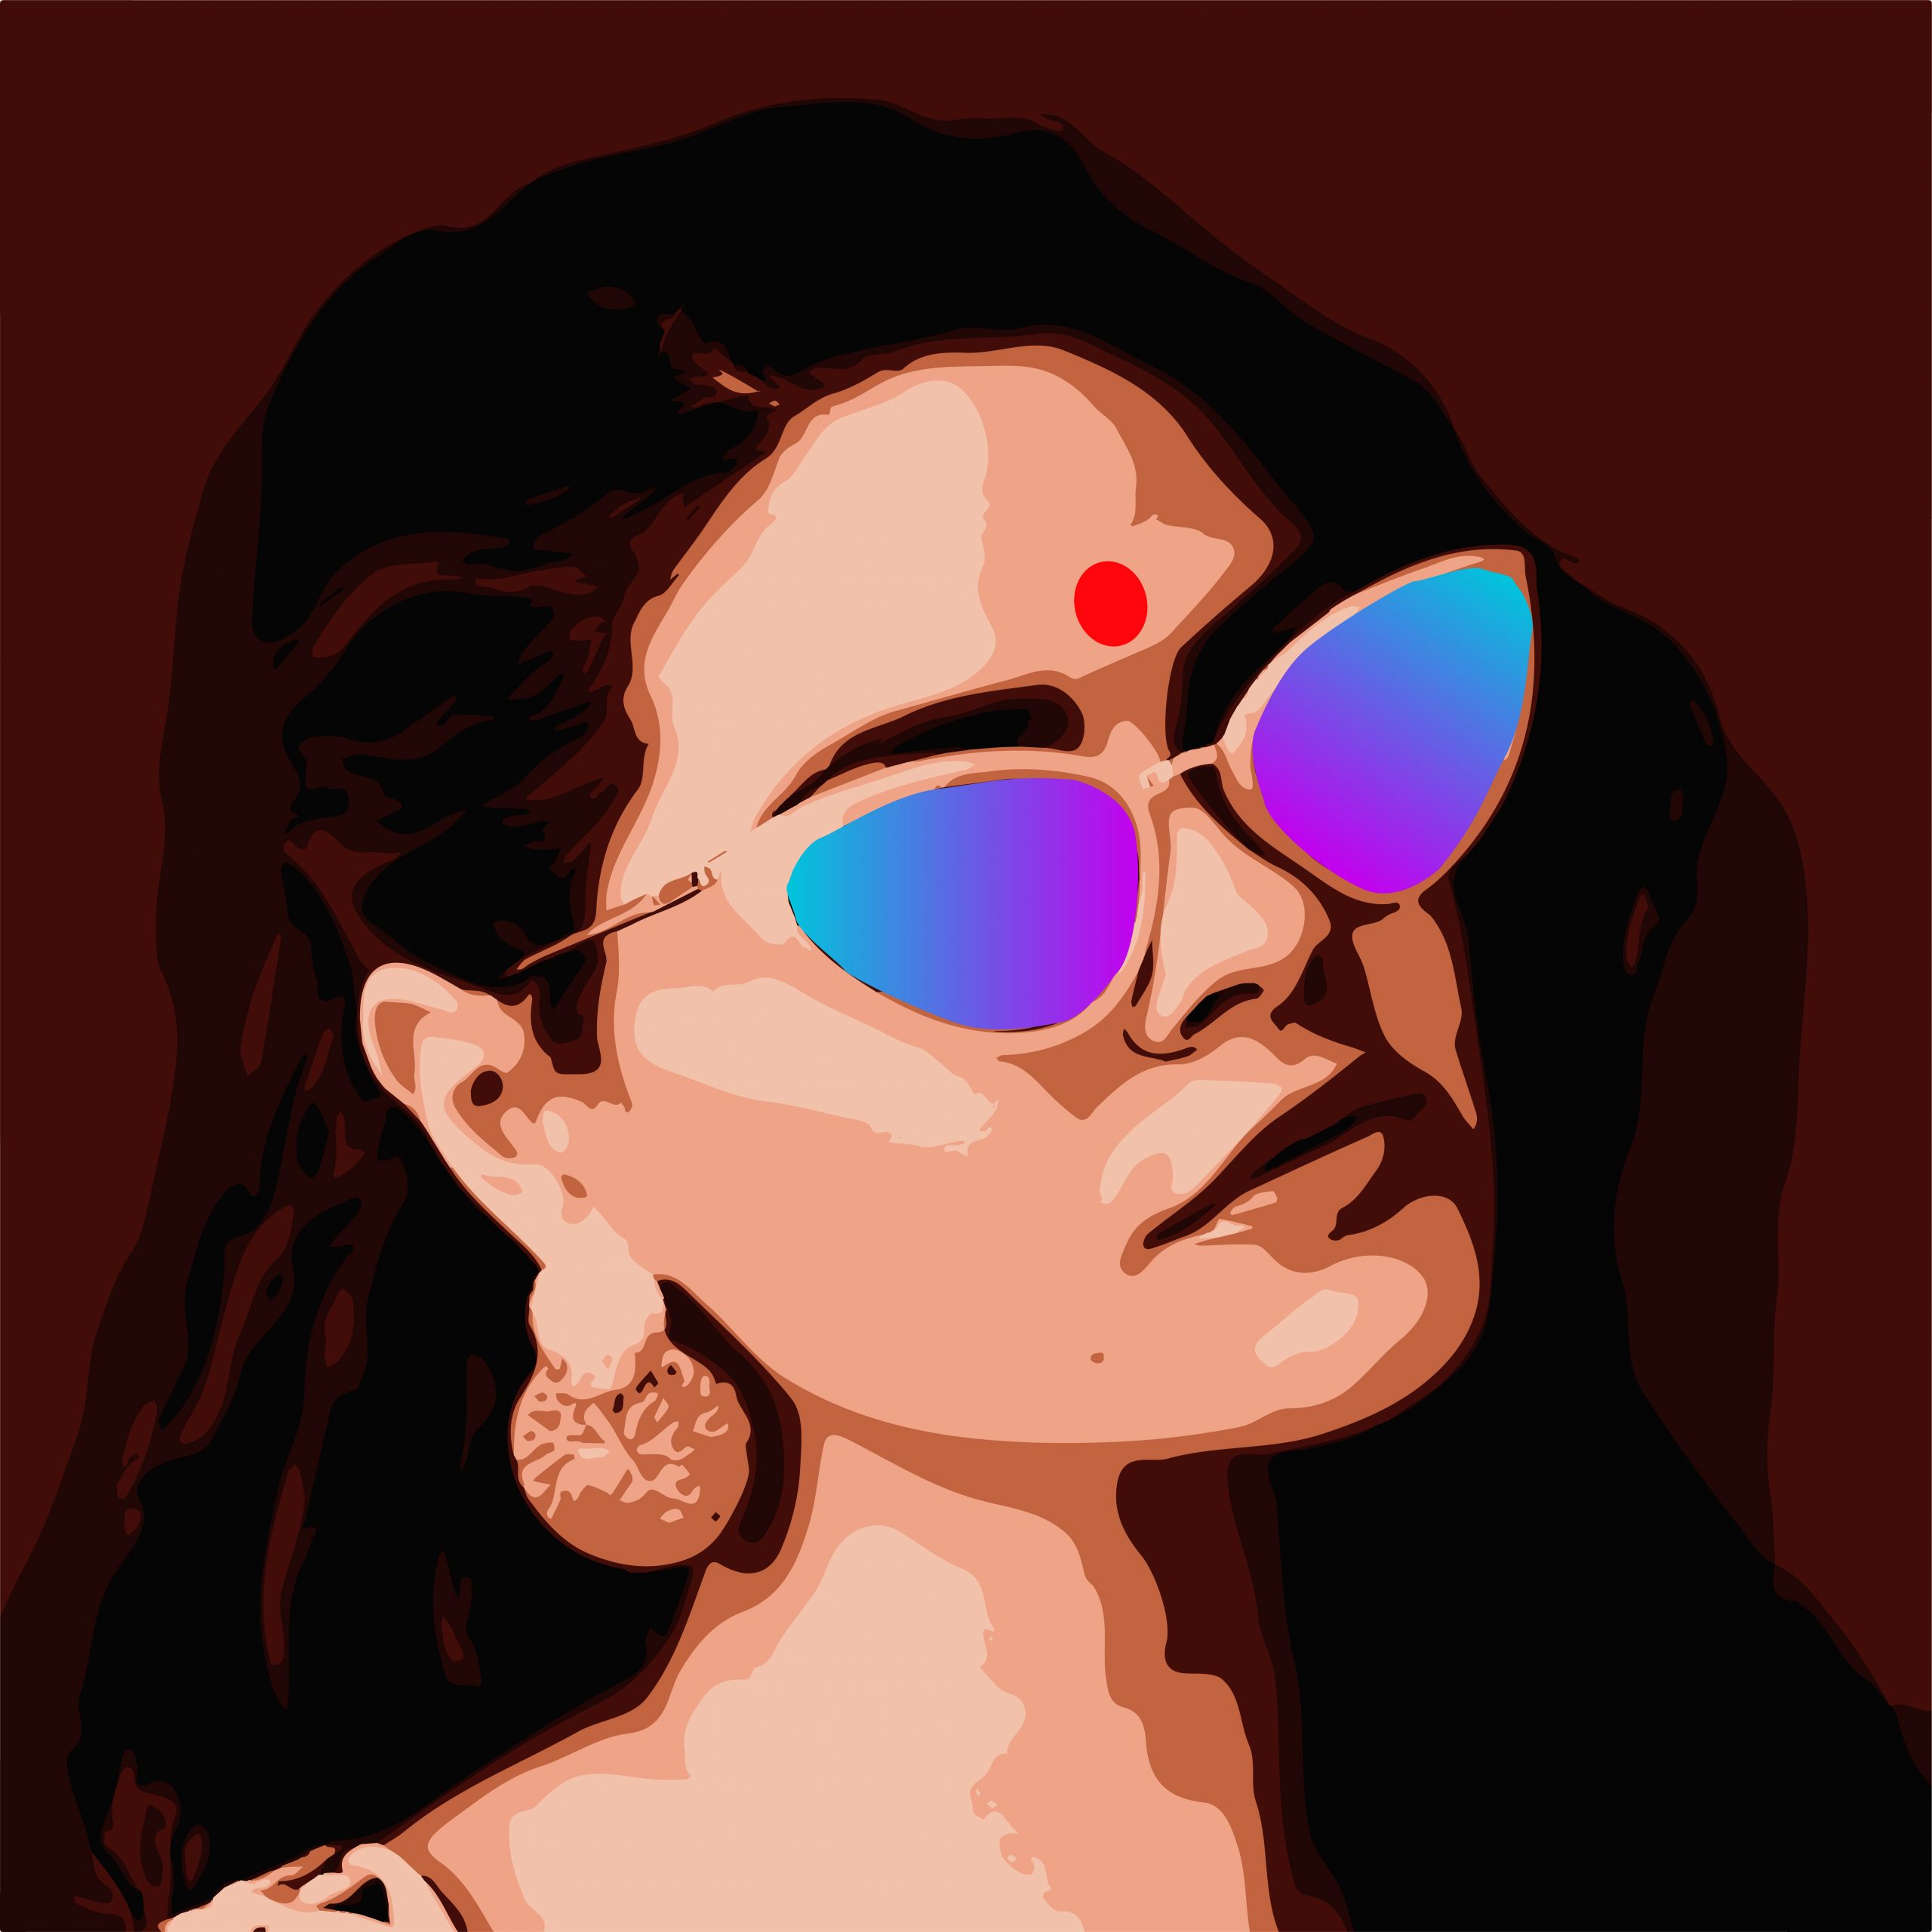 A girl and sunglasses illustration